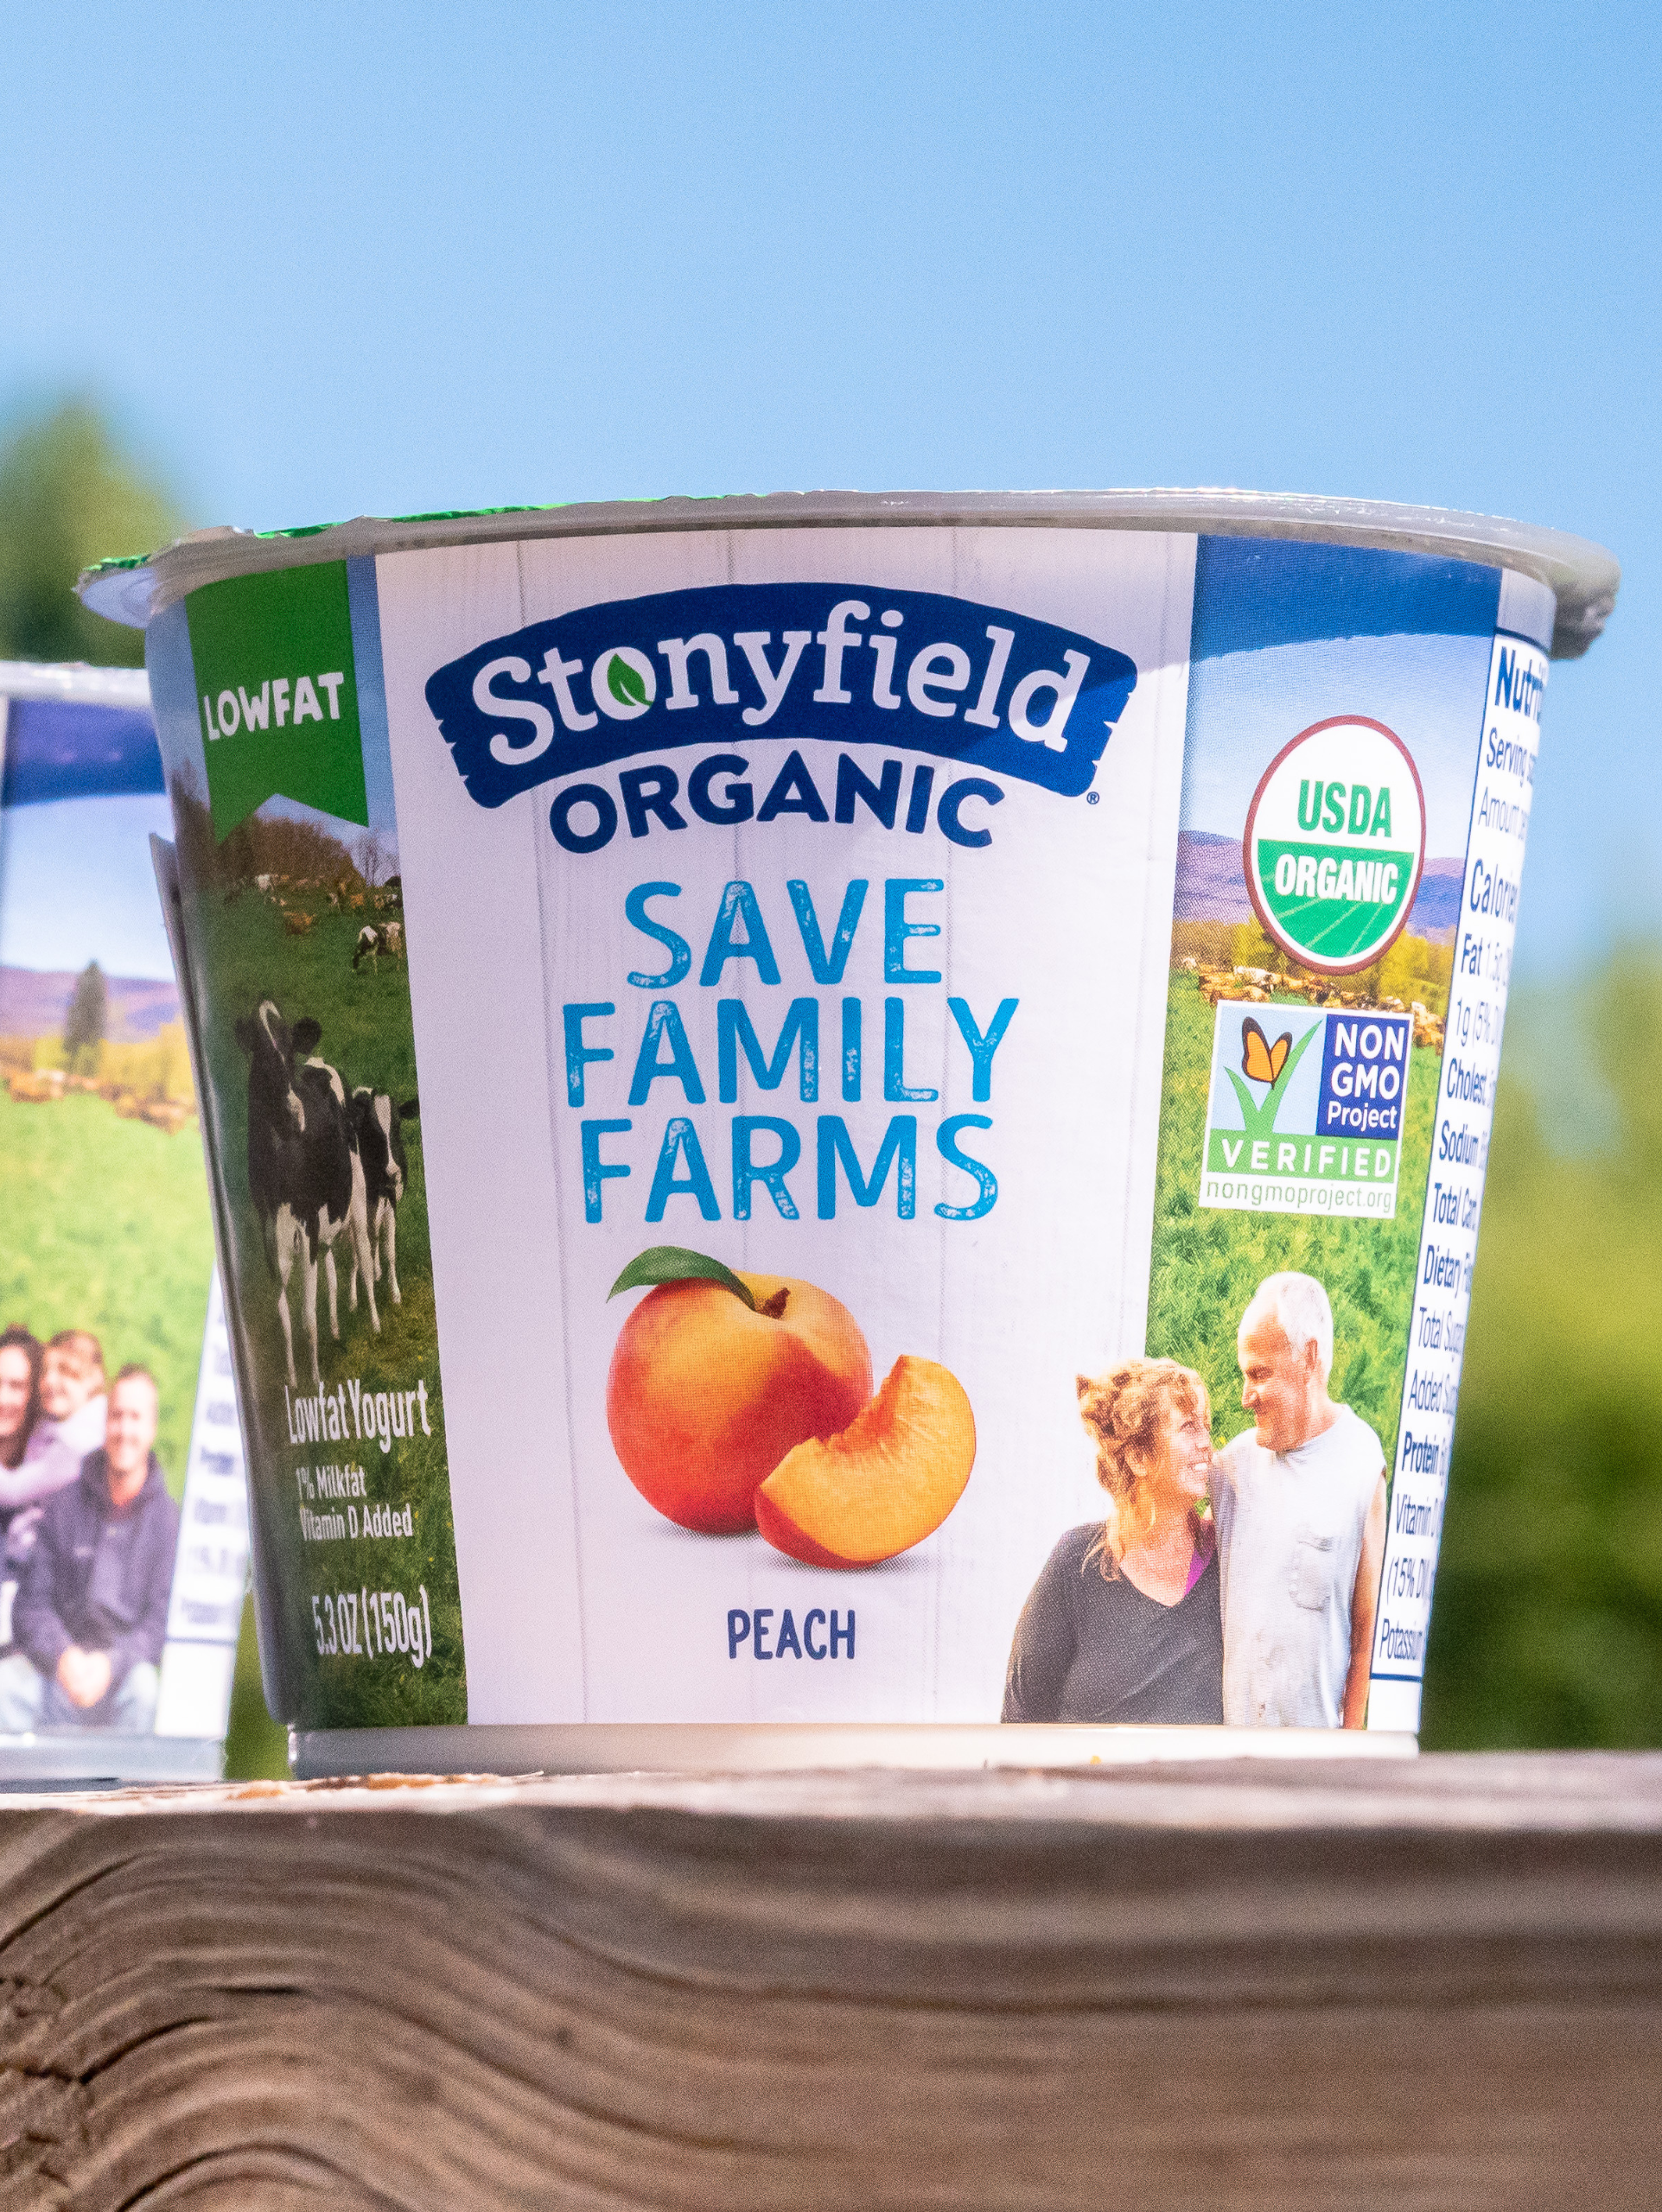 Stonyfield Organic: The Organic Seal Says It All